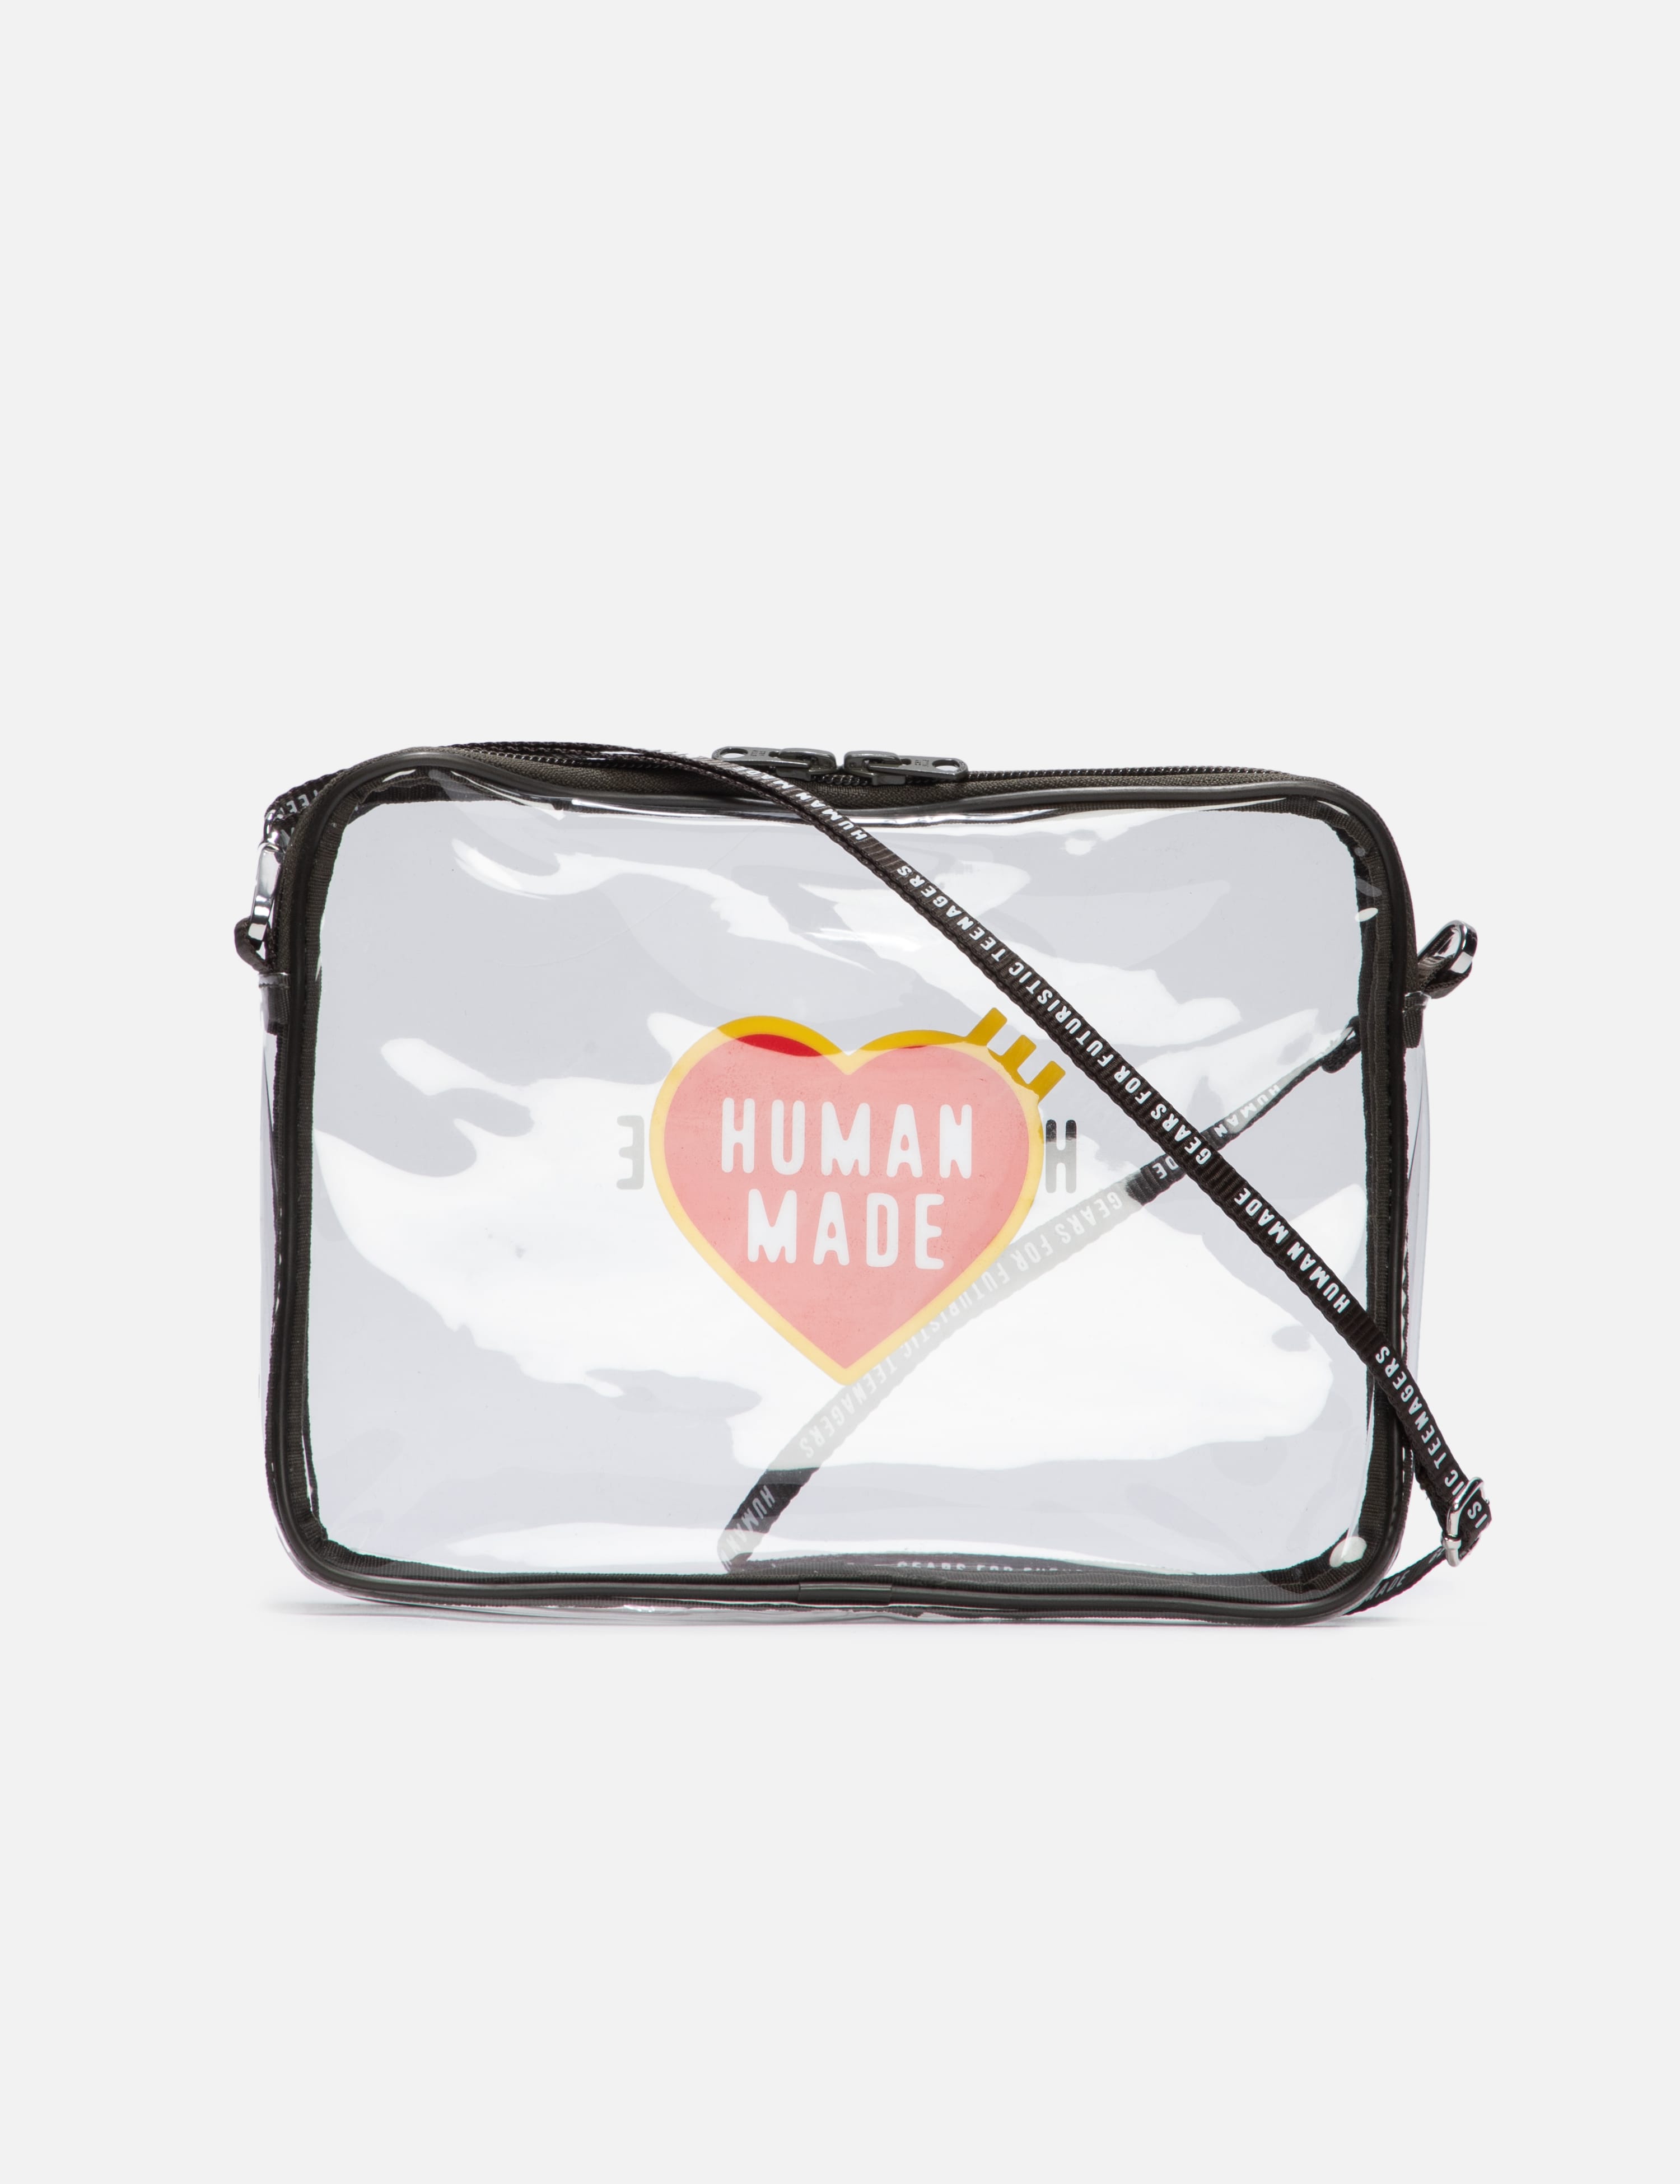 HUMAN MADE PVC Pouch Large - ハンドバッグ